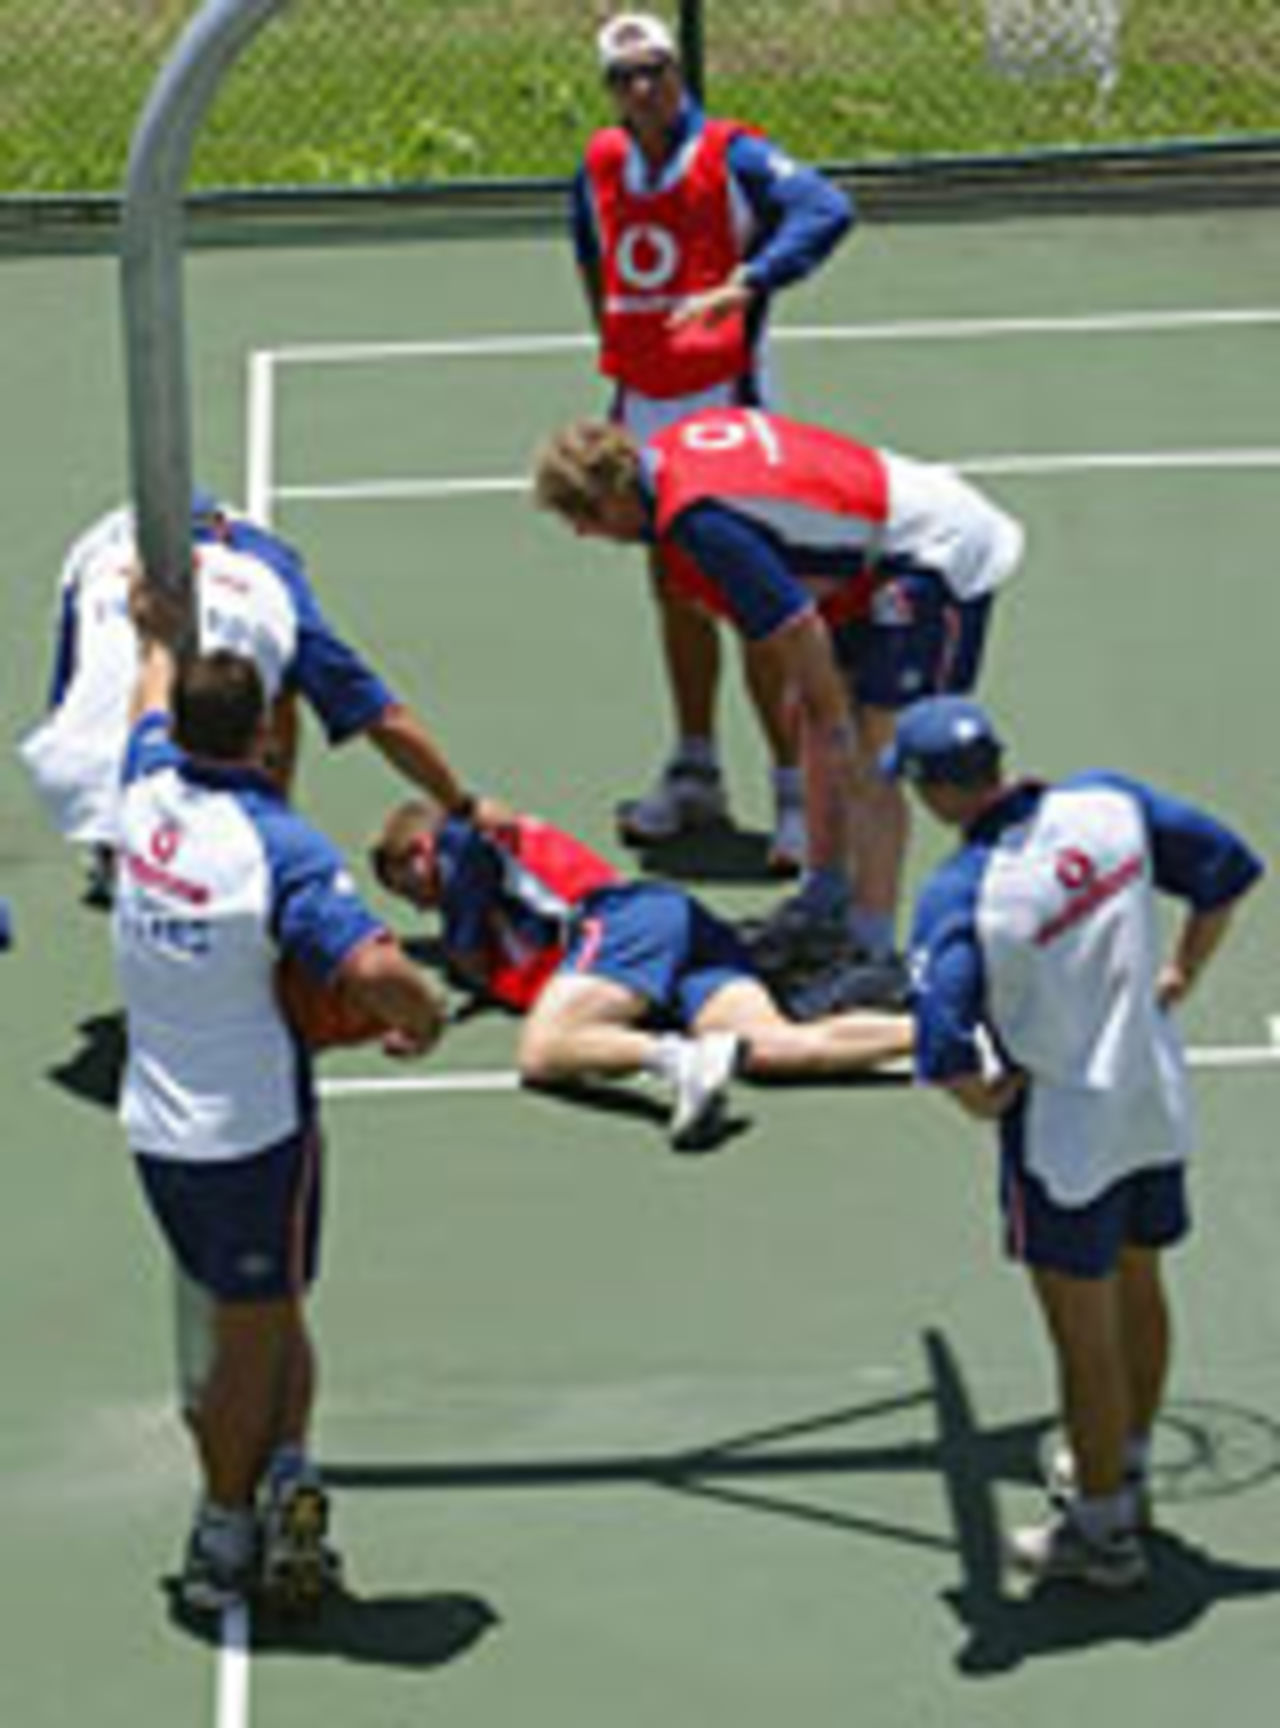 Paul Collingwood lies on the floor after breaking his nose after running into a post while playing basketball, Grenada, April 27, 2004